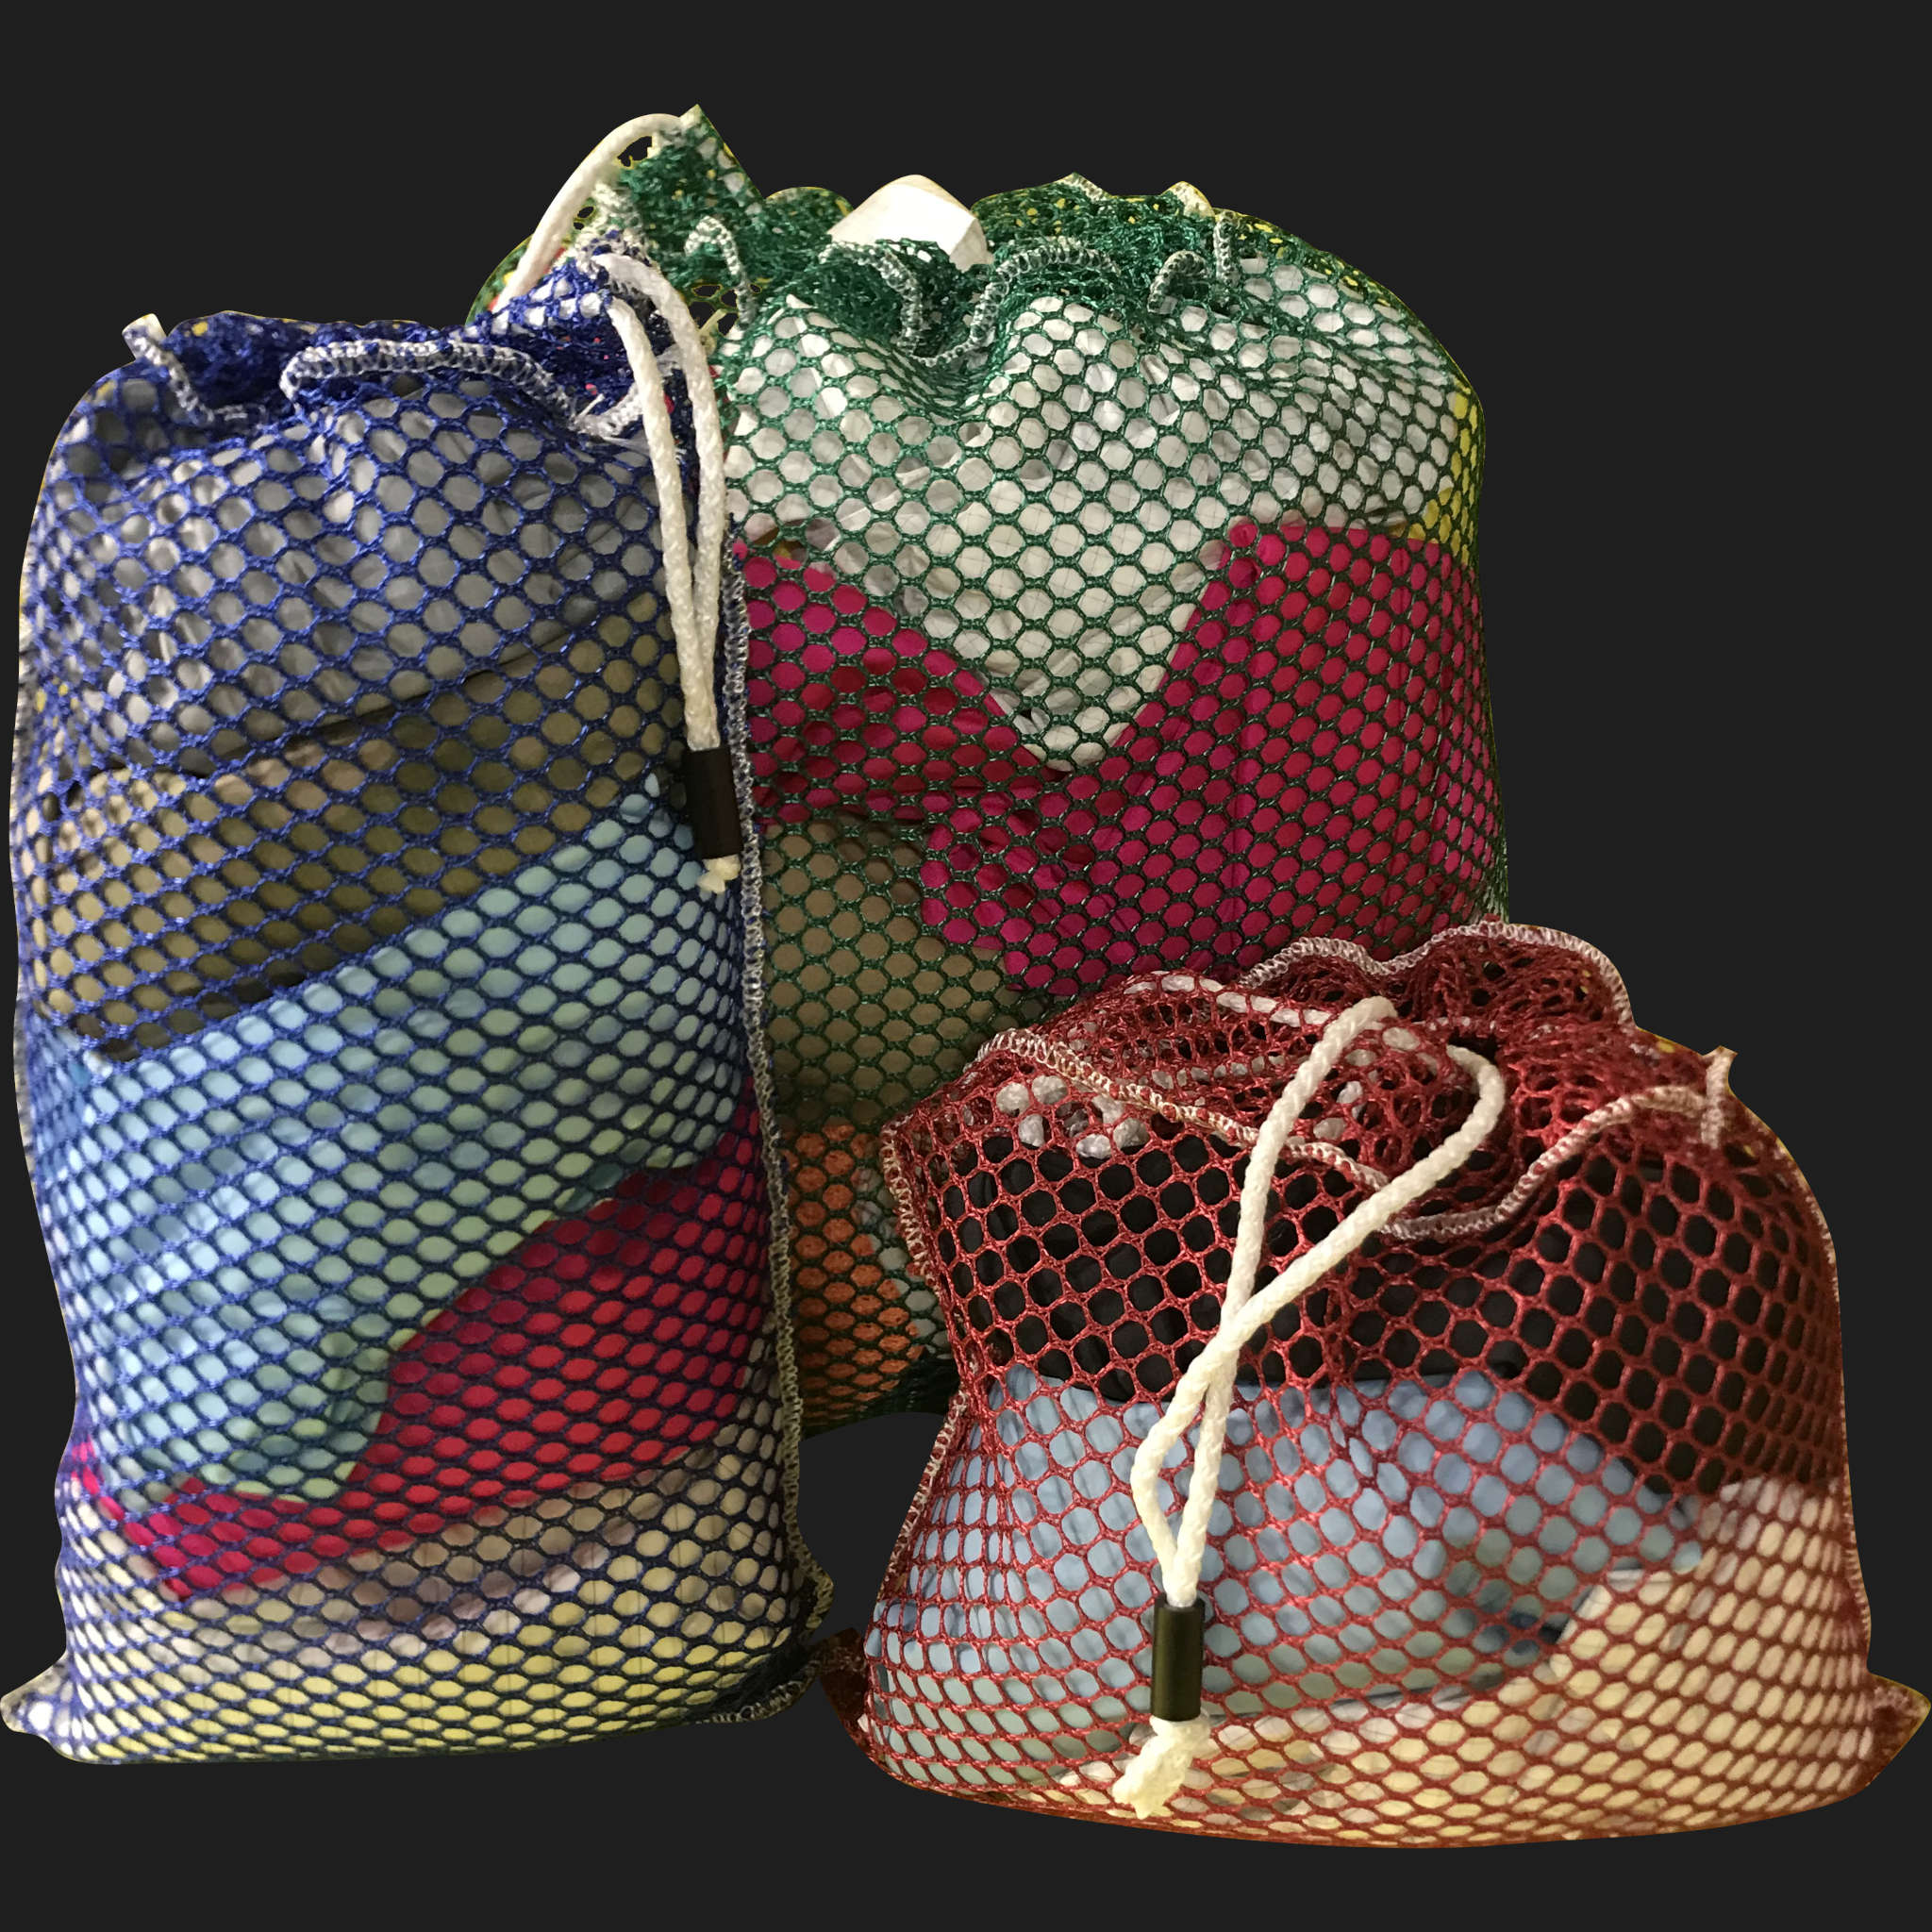 42" x 56" Customized Mesh-Net-Laundry Bags Heavy Duty with Cord and barrellock closure